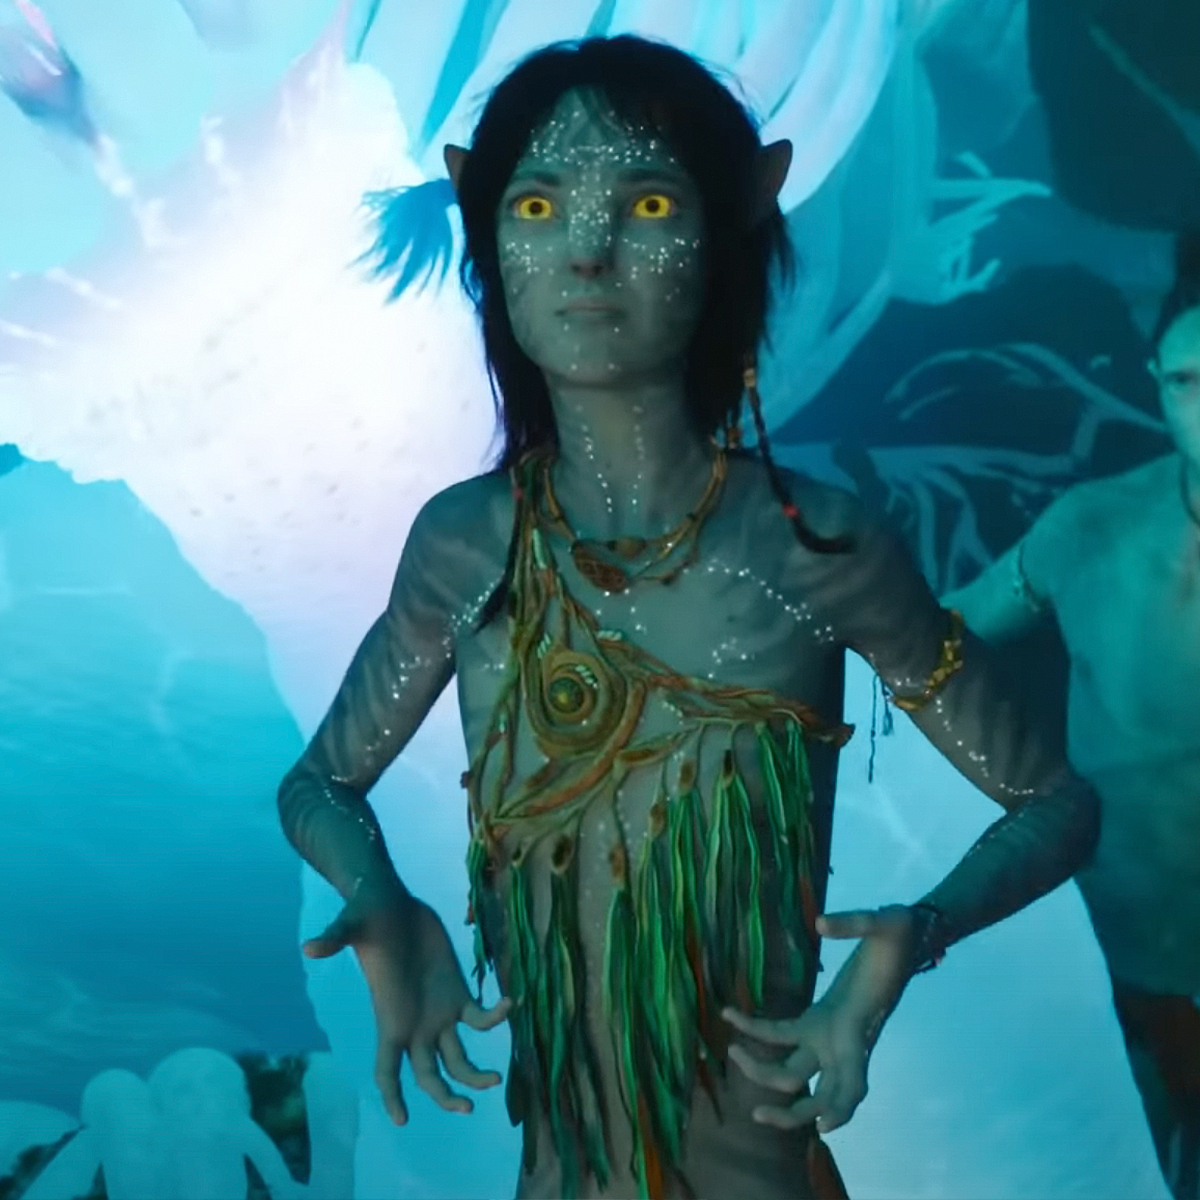 Why It Took 13 Years to Get Avatar: The Way of Water Into Theaters